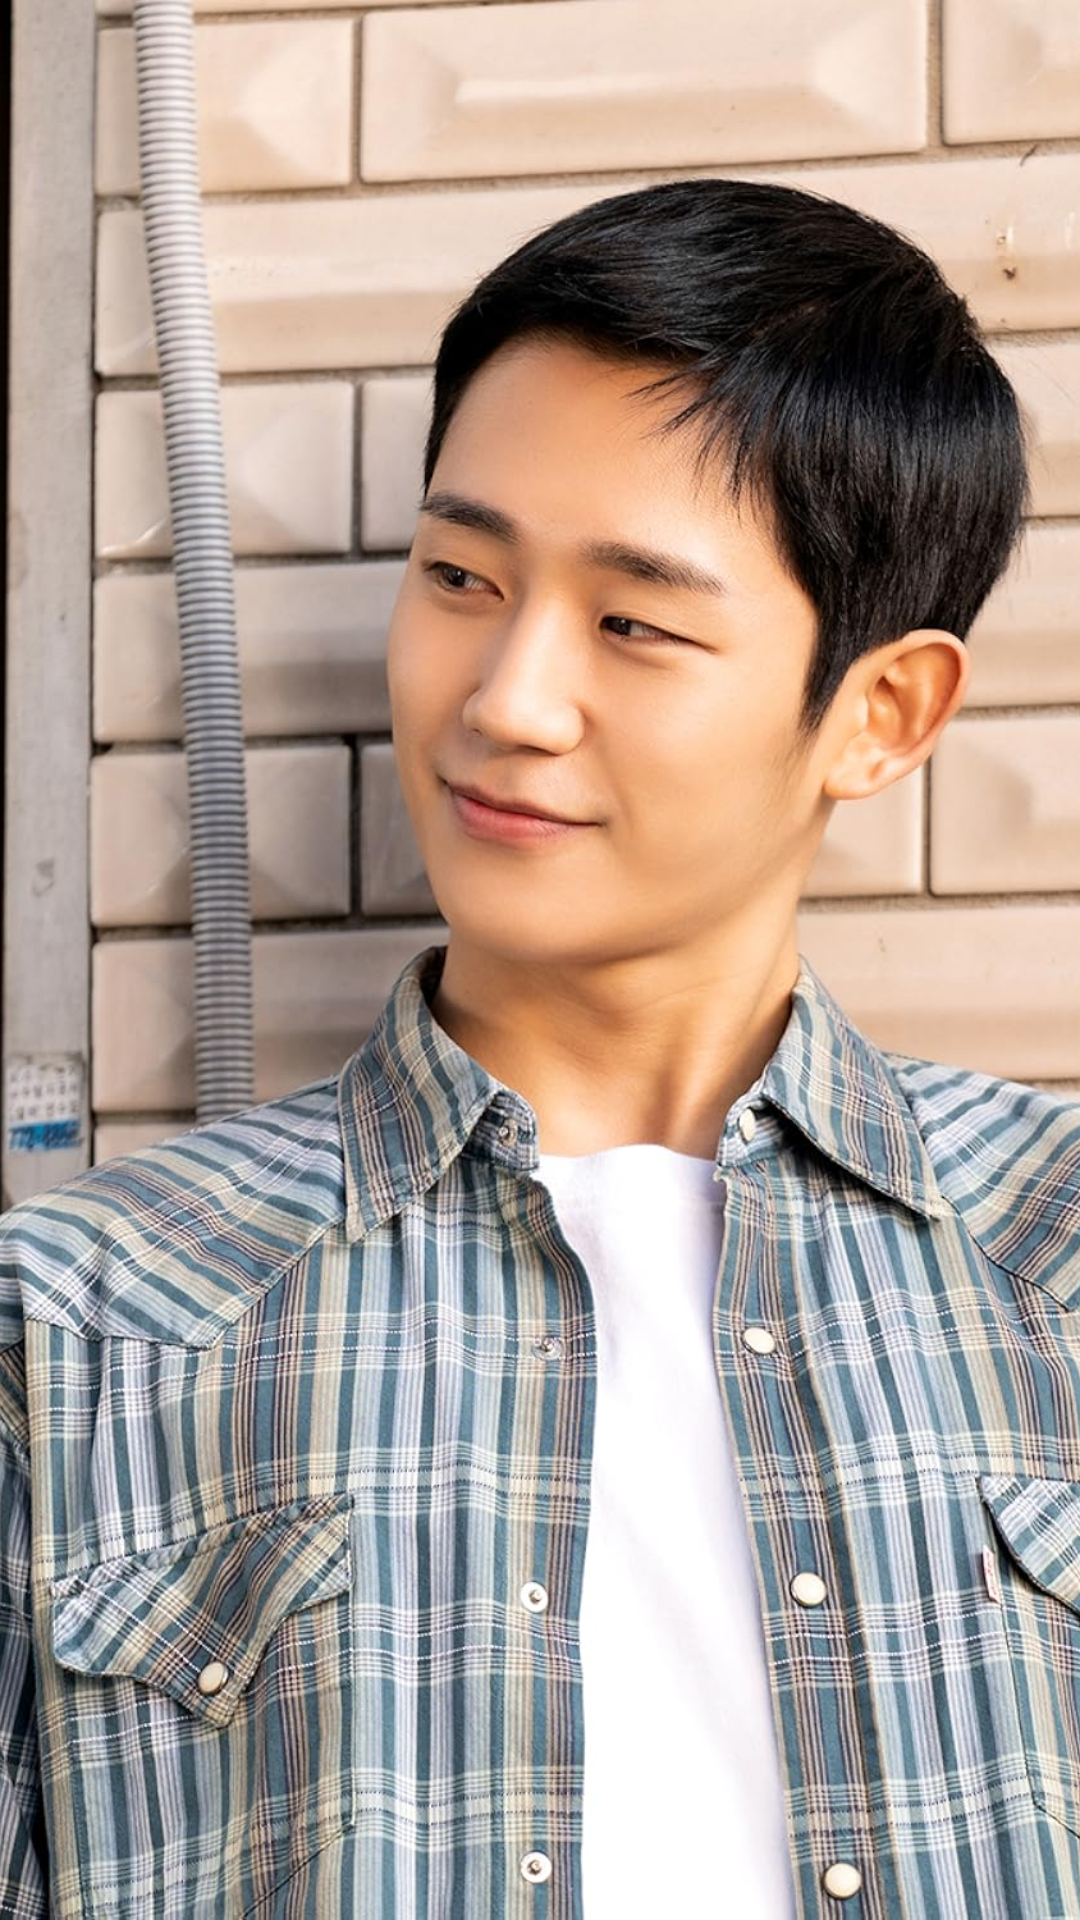 Missing Snowdrop's Jung Hae-in? Here are 5 must-watch K-dramas